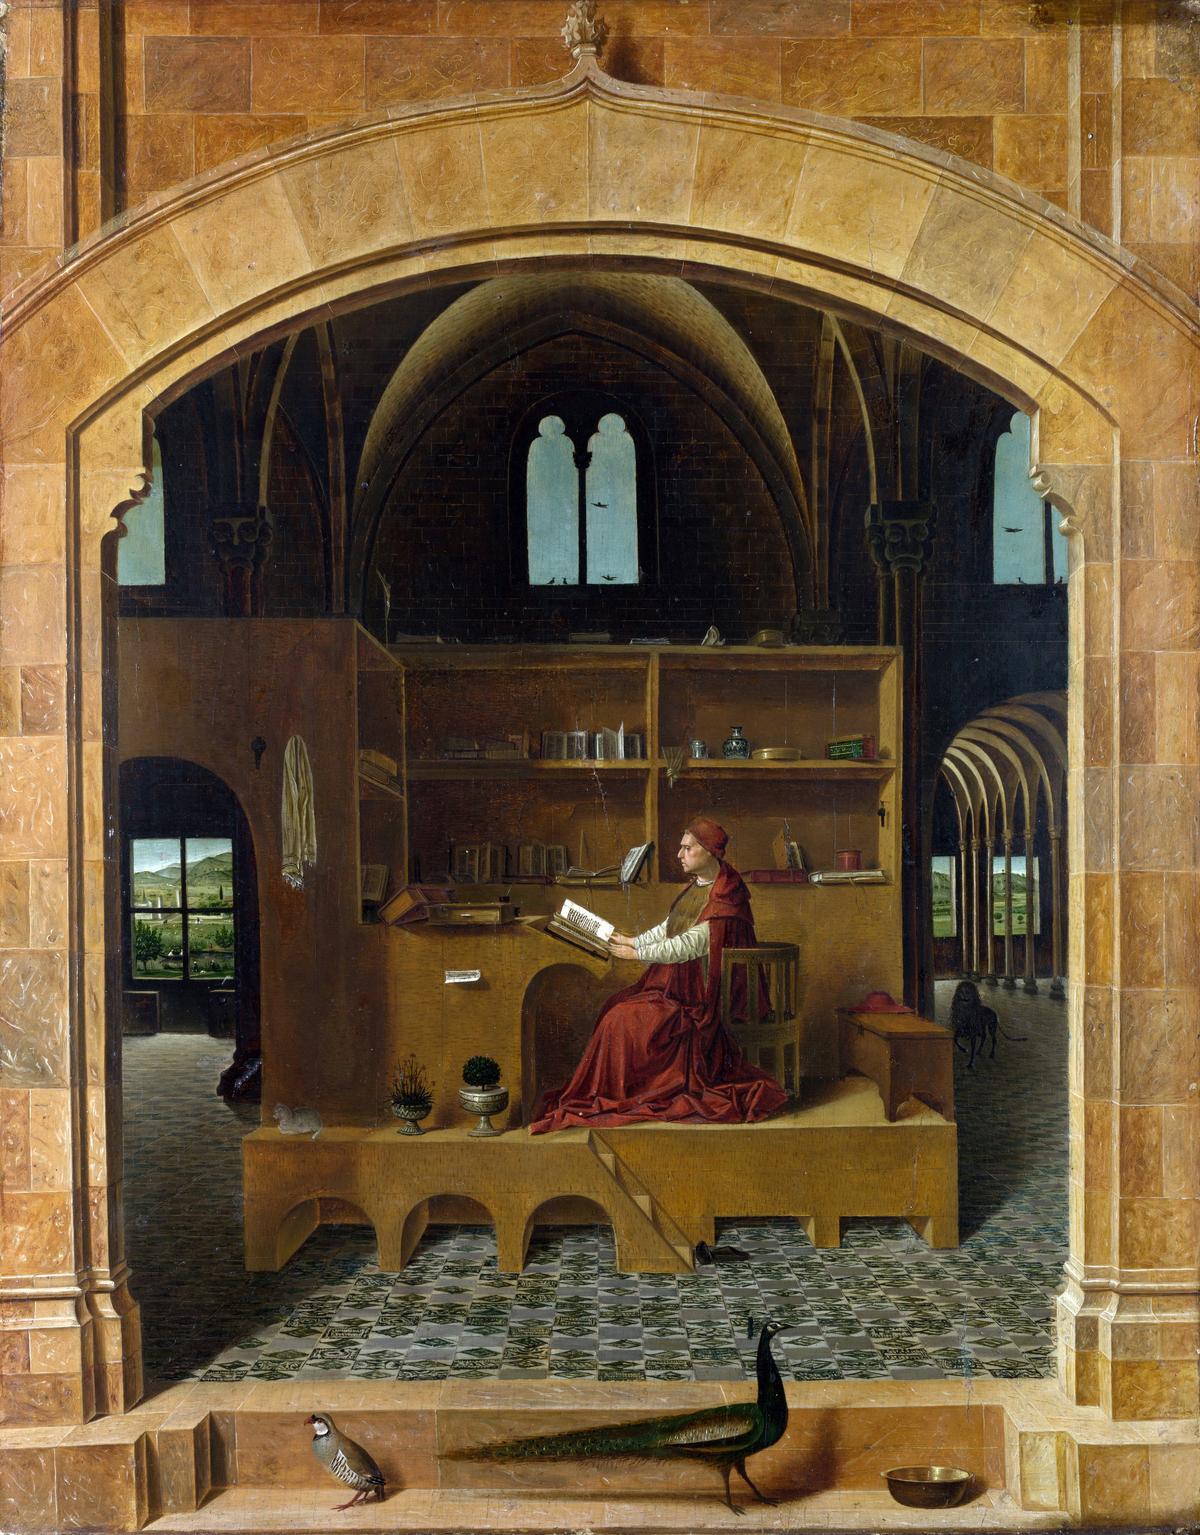 "Saint Jerome in his Study" by Antonello da Messina, 1474. Oil on lime. National Gallery, London (public domain).